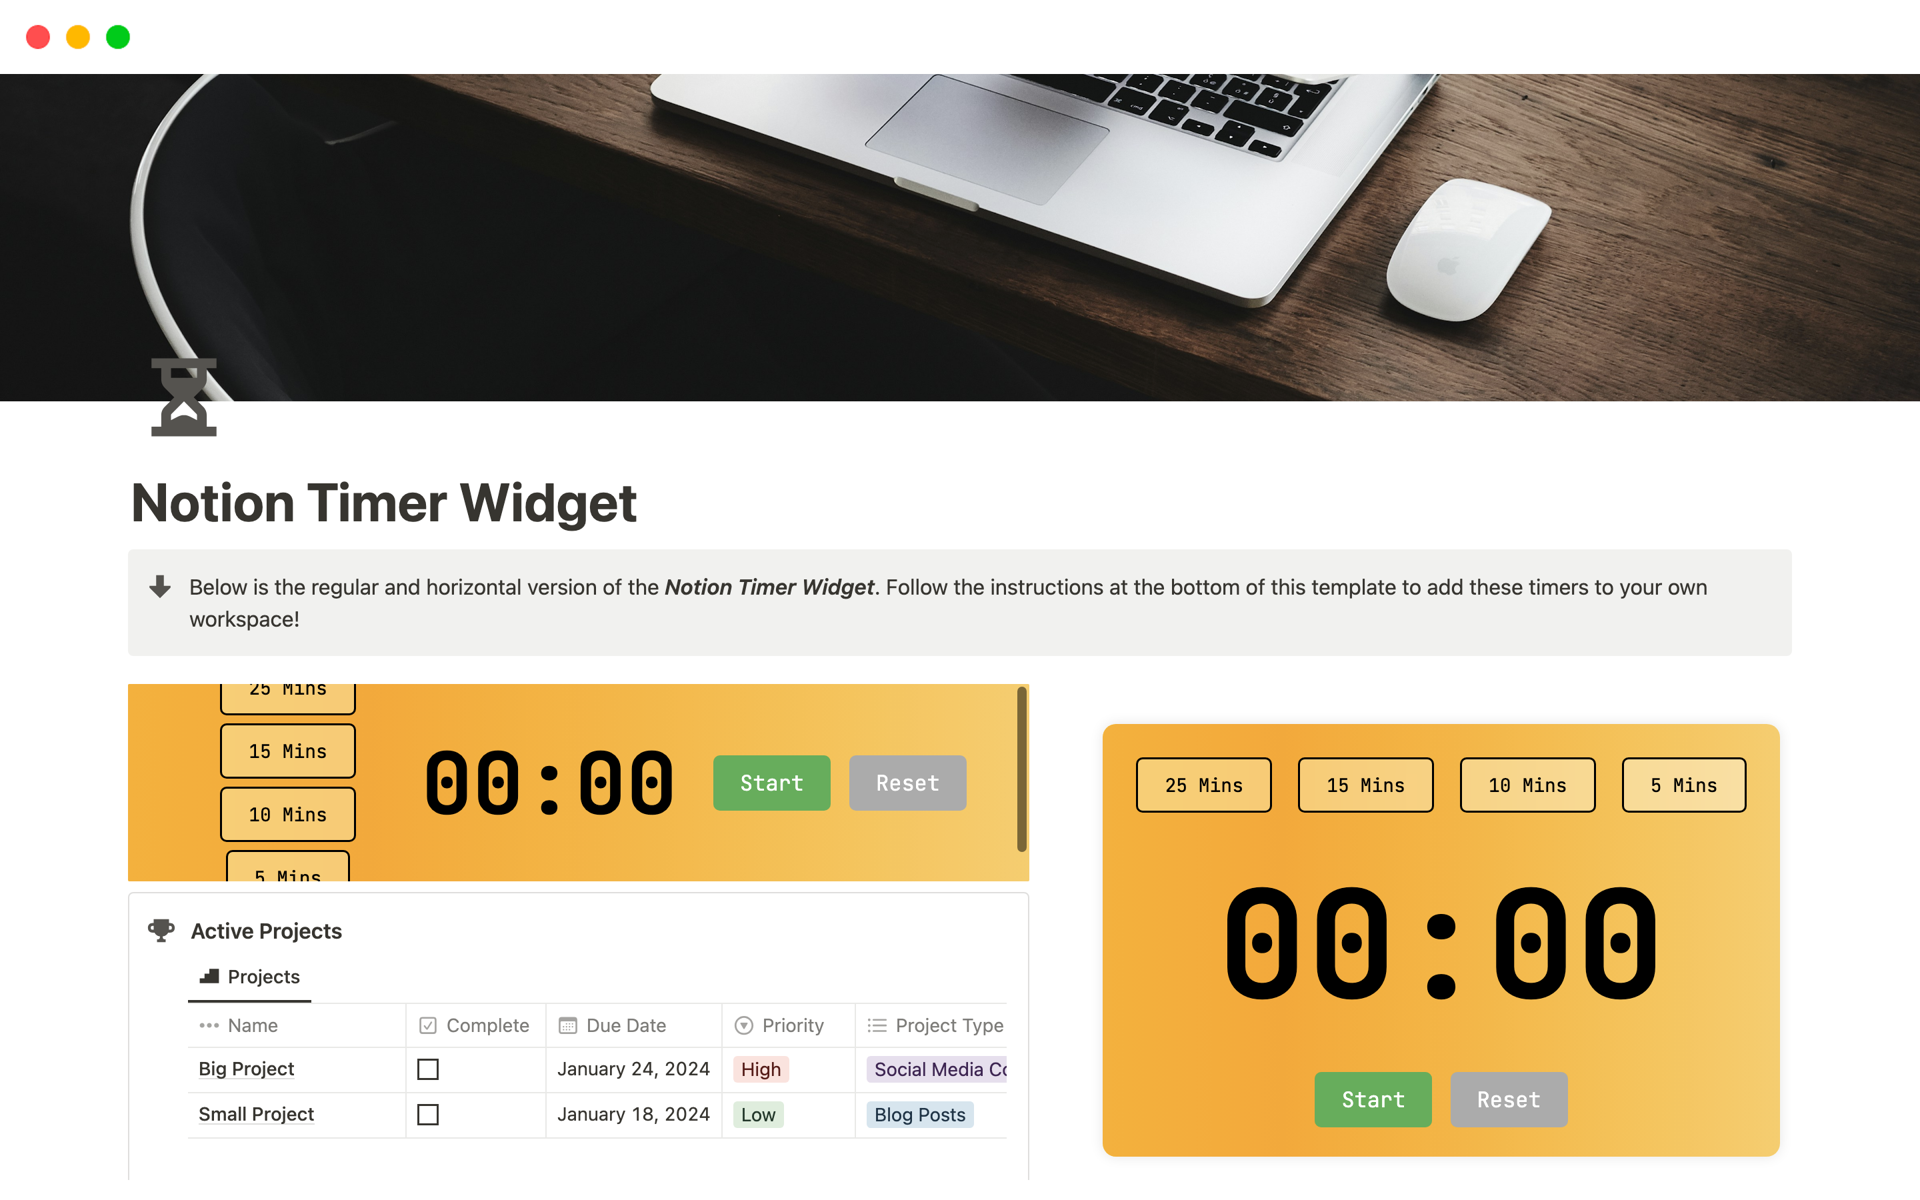 The Notion Timer Widget is a versatile tool designed to enhance productivity and time management within the Notion workspace.